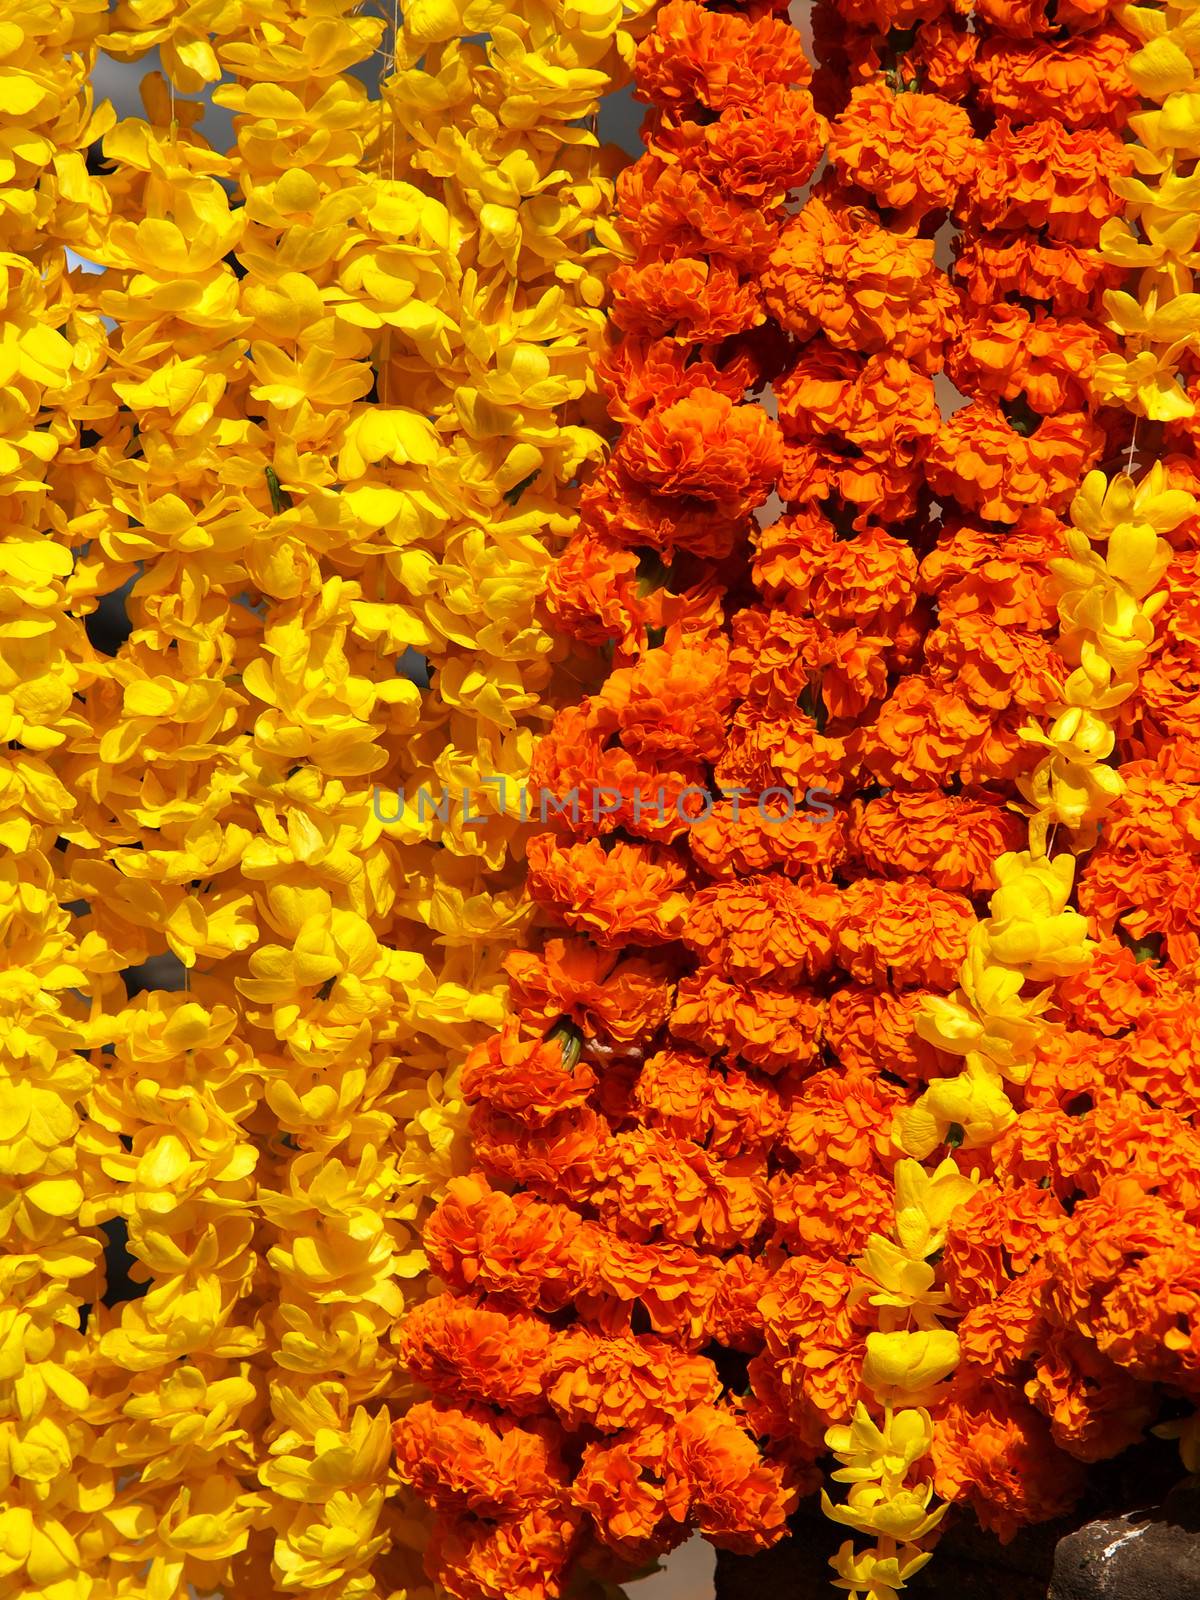 floral arrangement for holi festival and religious offerings in india.        